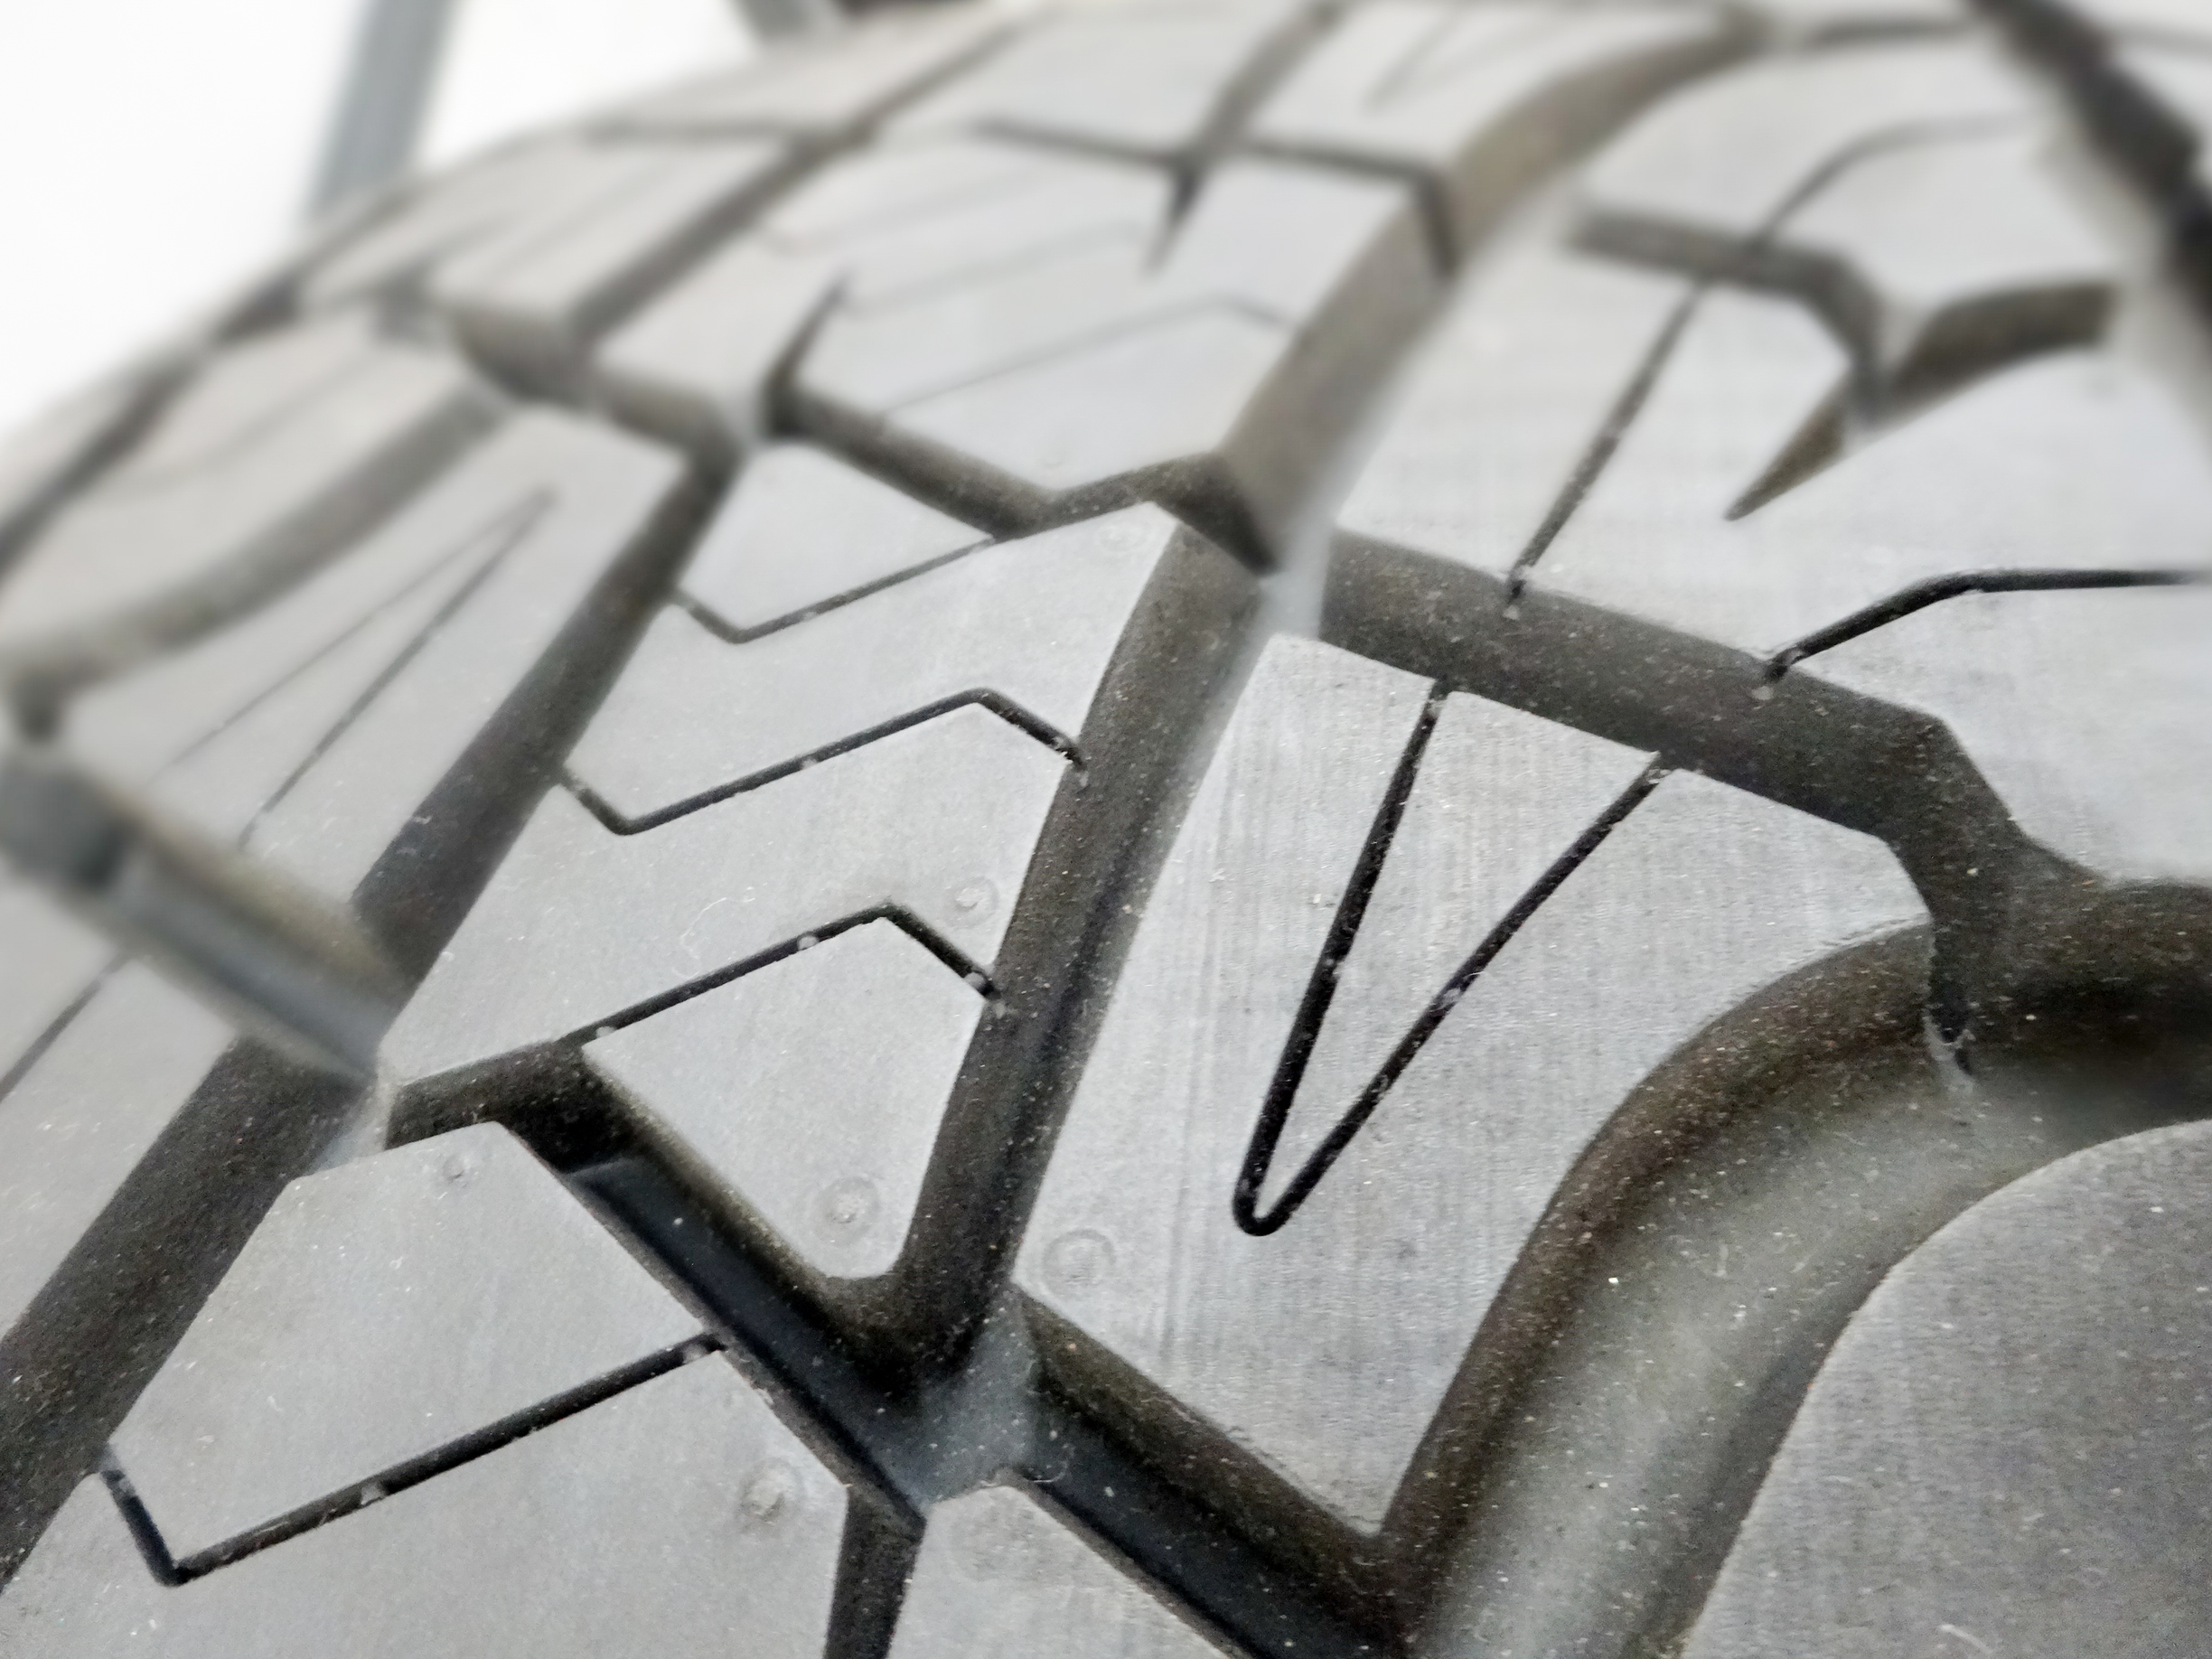 Reasons to buy Retreaded Tires instead of buying new ones